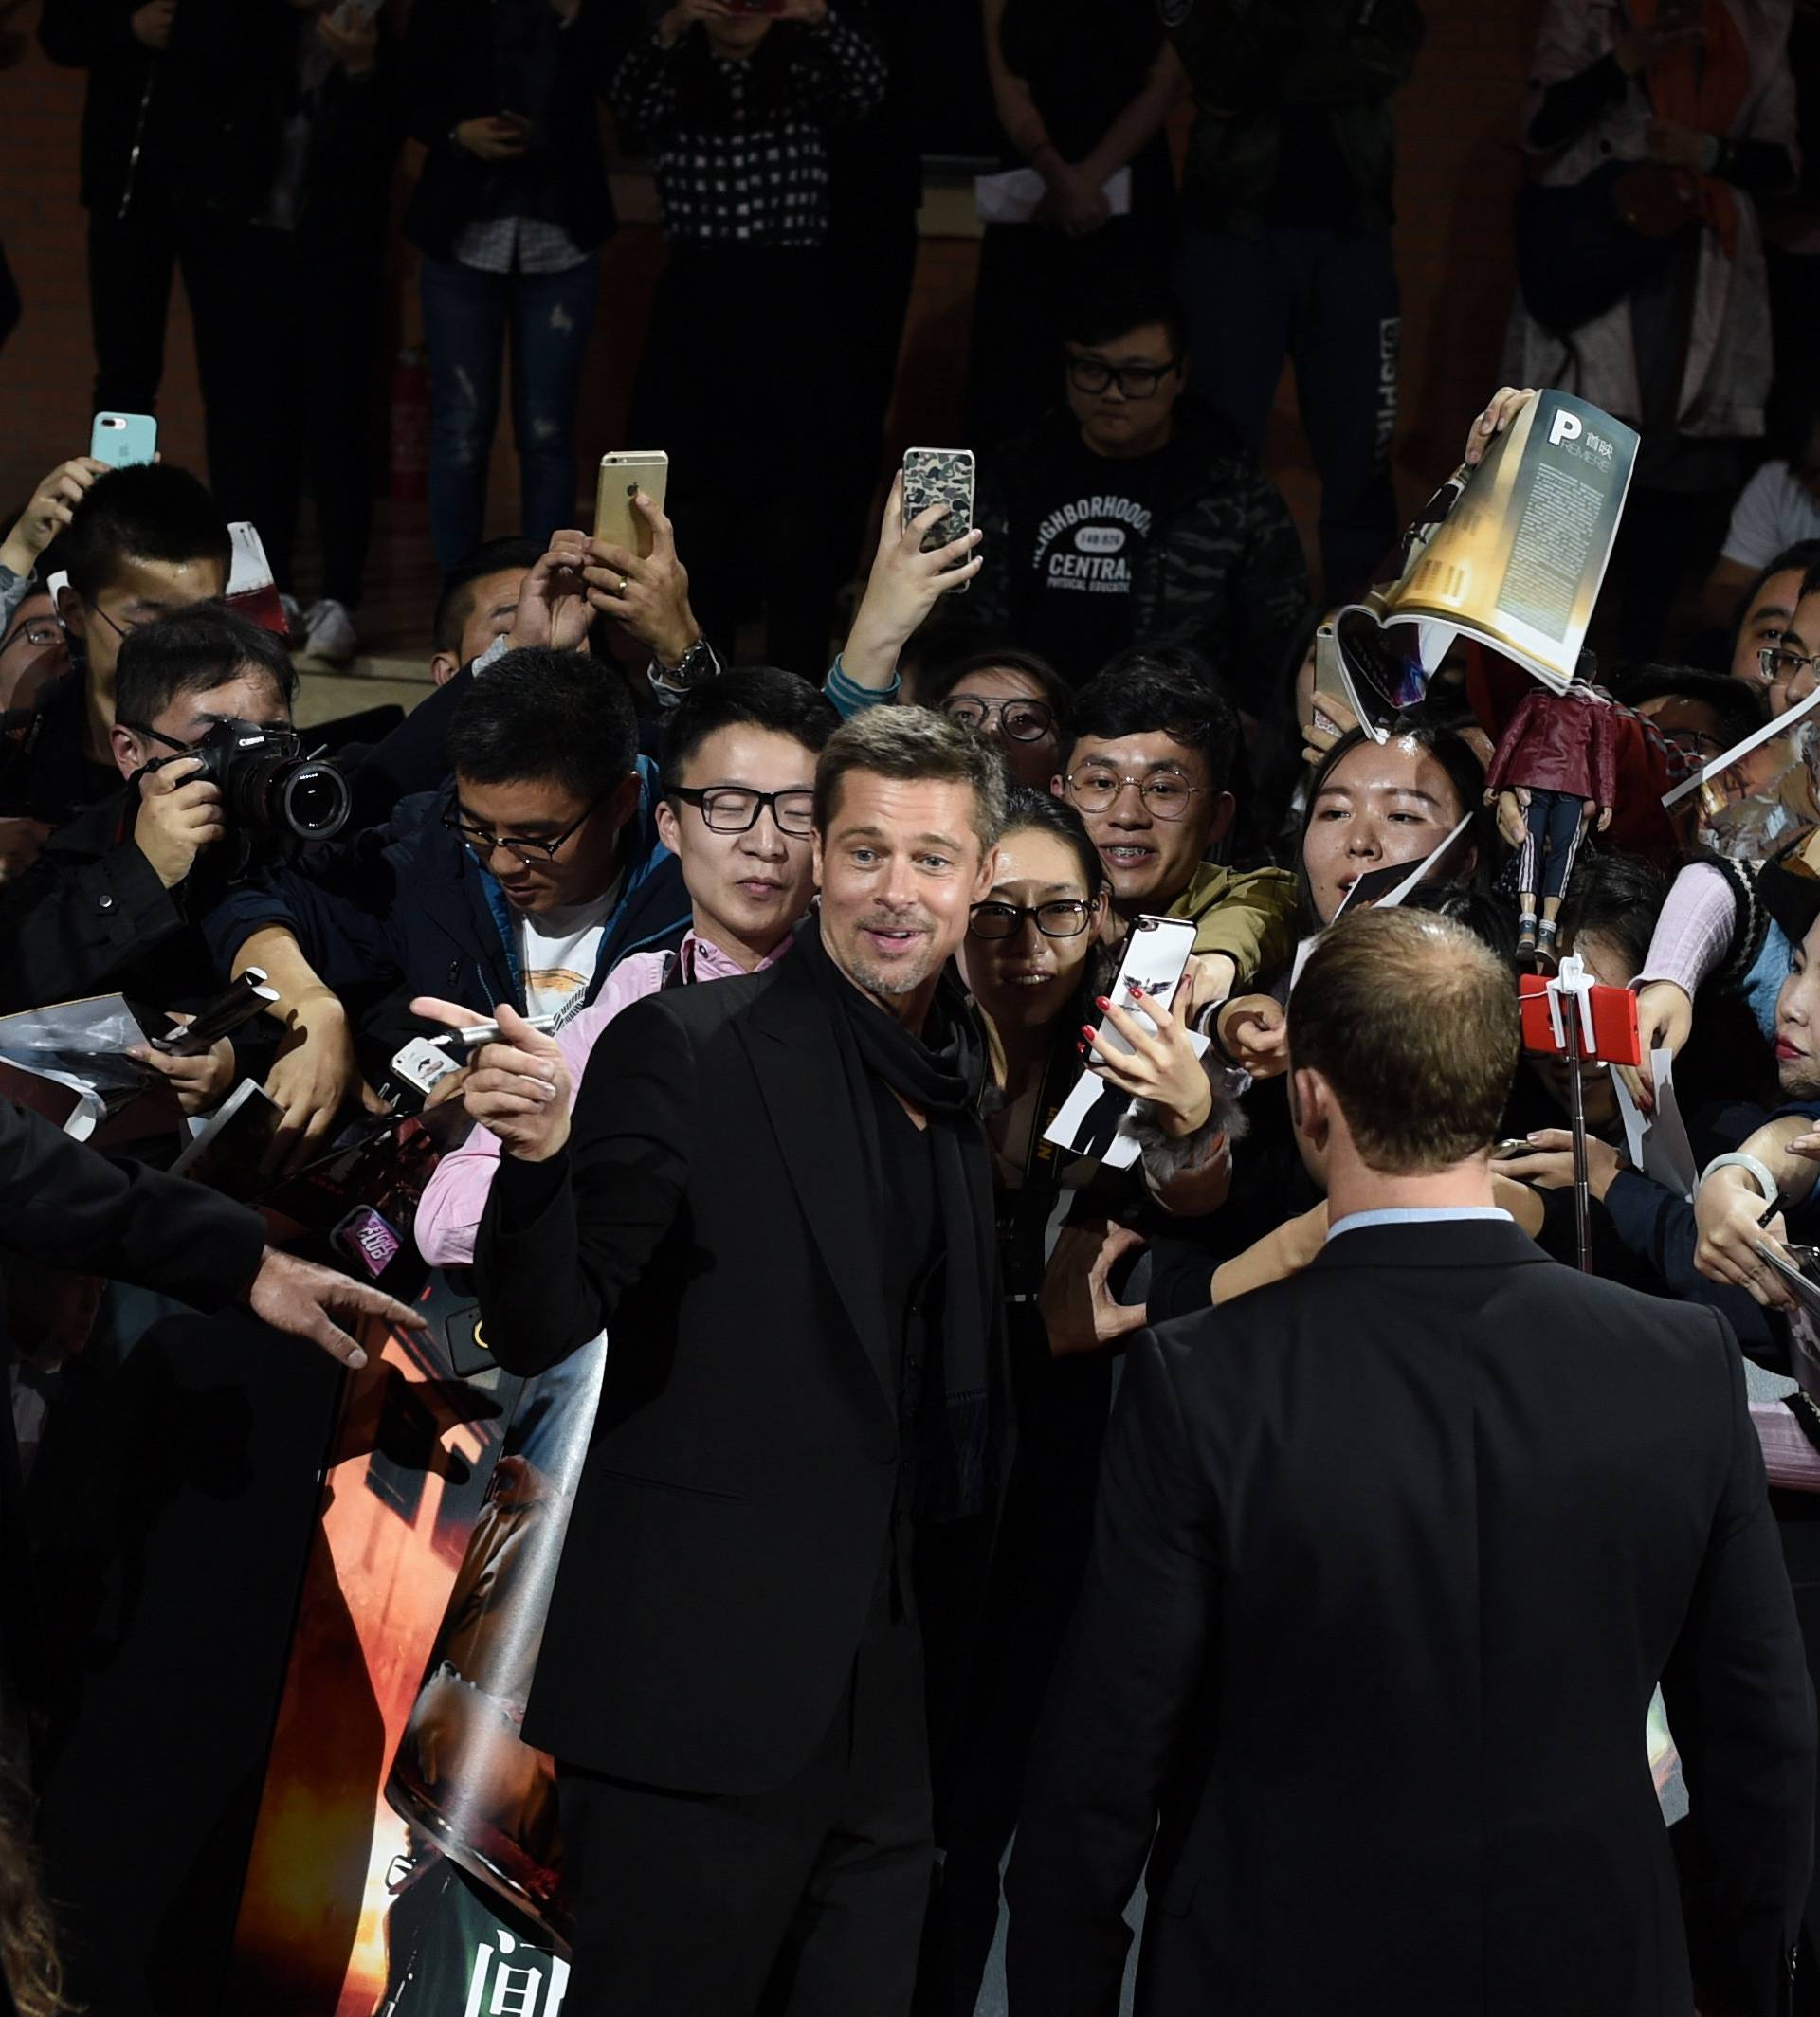 Actor Brad Pitt attends a promotional event for the movie "Allied" in Shanghai